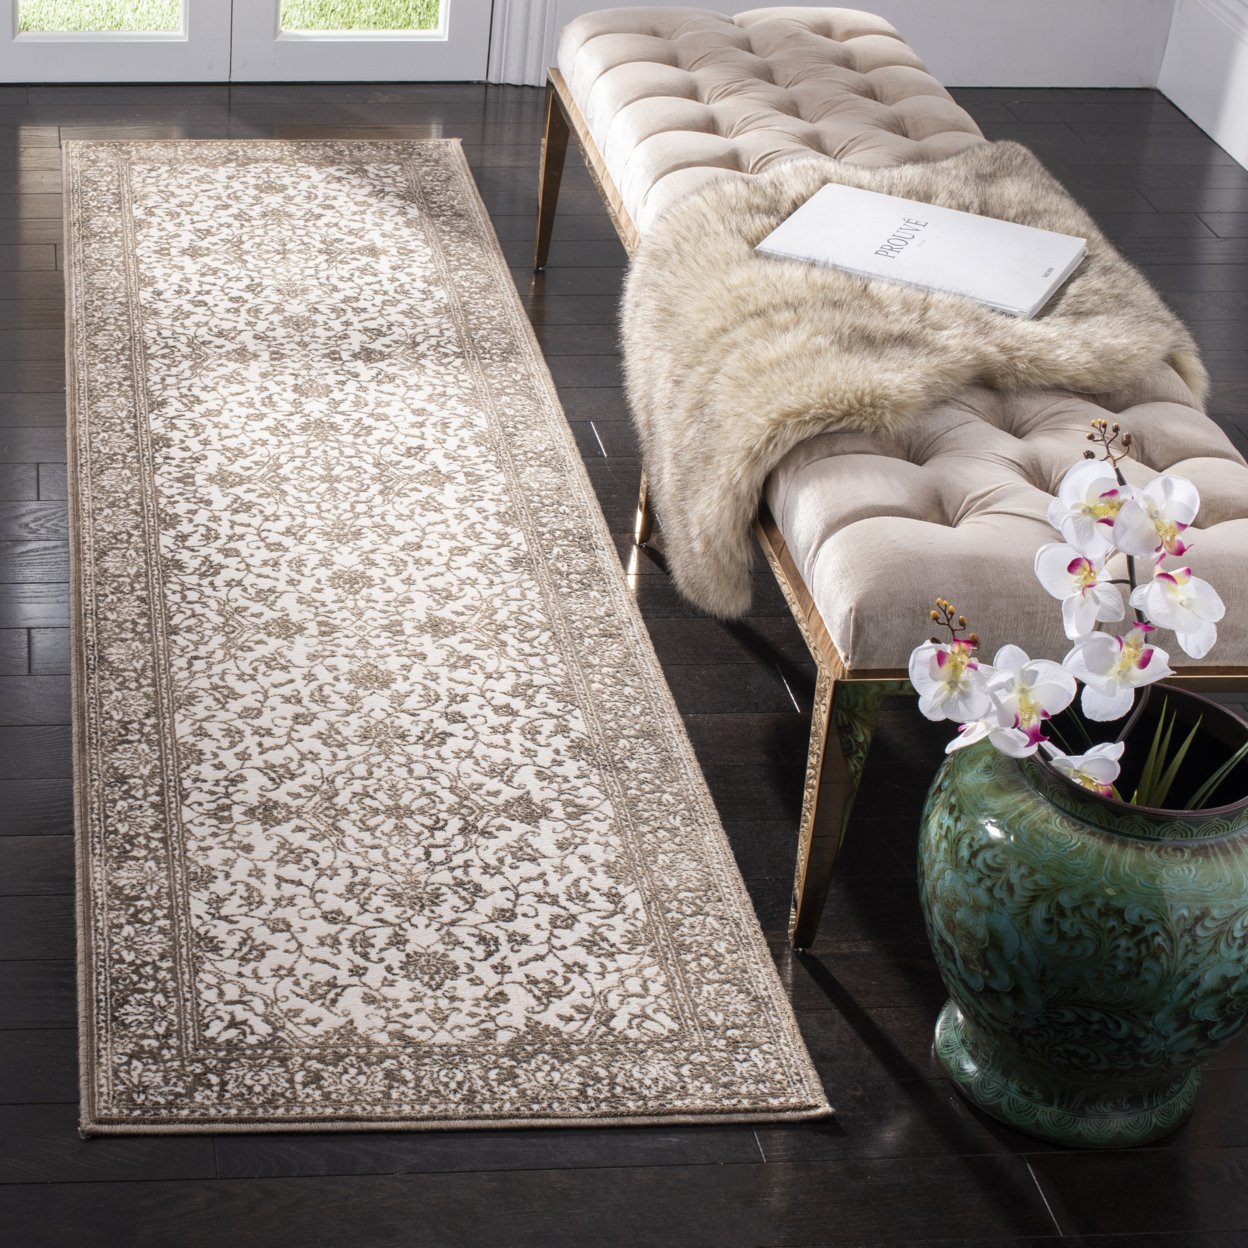 SAFAVIEH Noble Collection NBL659-5280 Brown / Creme Rug - 2' 2 X 8'